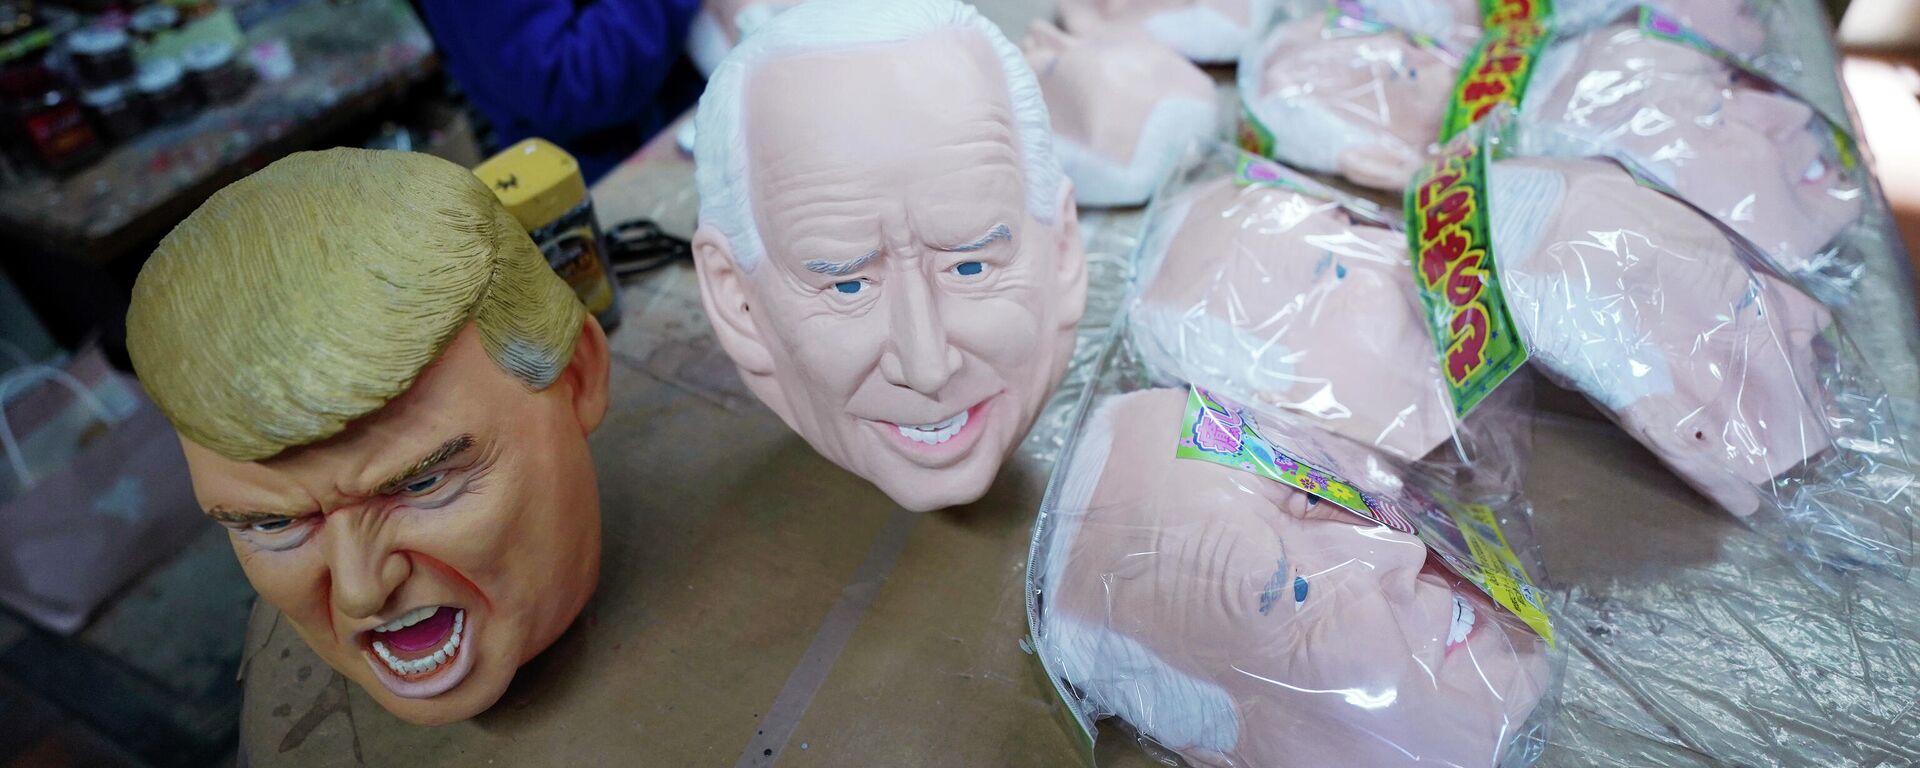 Near the finish products of rubber masks depicting President-elect Joe Biden and President Donald Trump, an employee adds details to the rubber masks at the Ogawa Studios in Saitama, north of Tokyo, Wednesday, Nov. 11, 2020 - Sputnik International, 1920, 26.04.2022